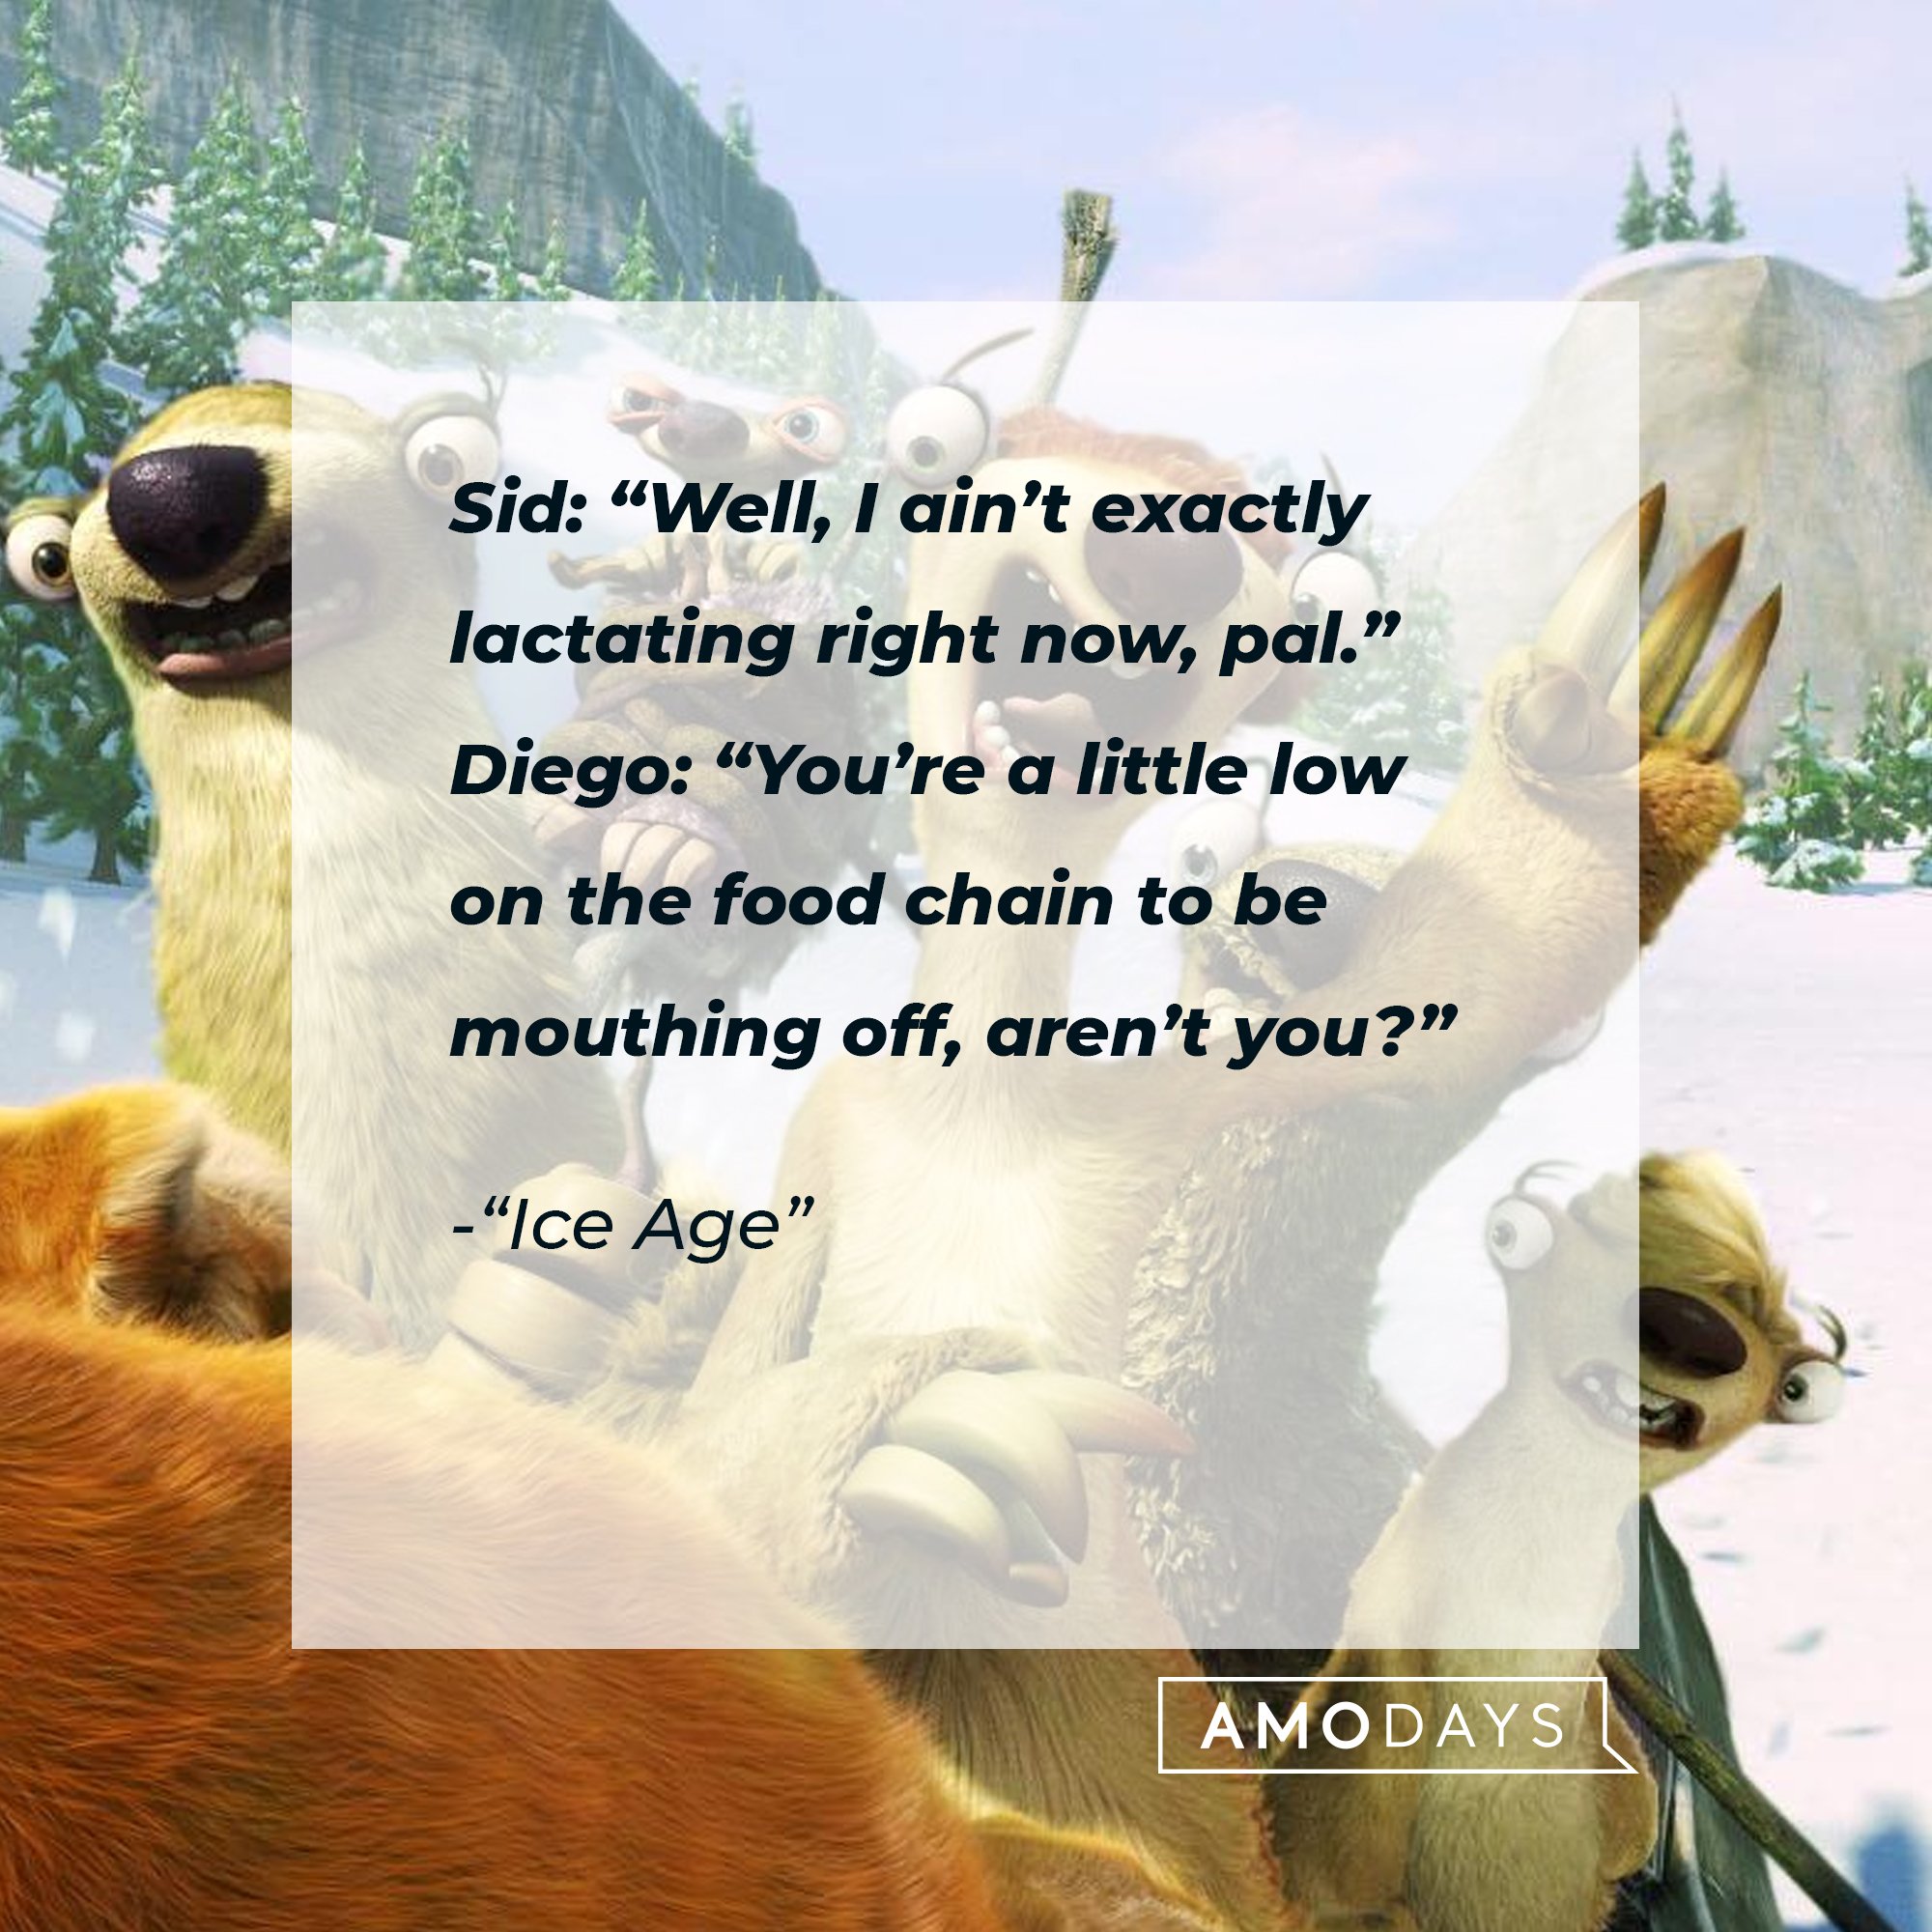 Ice Age's dialogue: Sid: “Well, I ain’t exactly lactating right now, pal.”  Diego: “You’re a little low on the food chain to be mouthing off, aren’t you?”  | Image: AmoDays